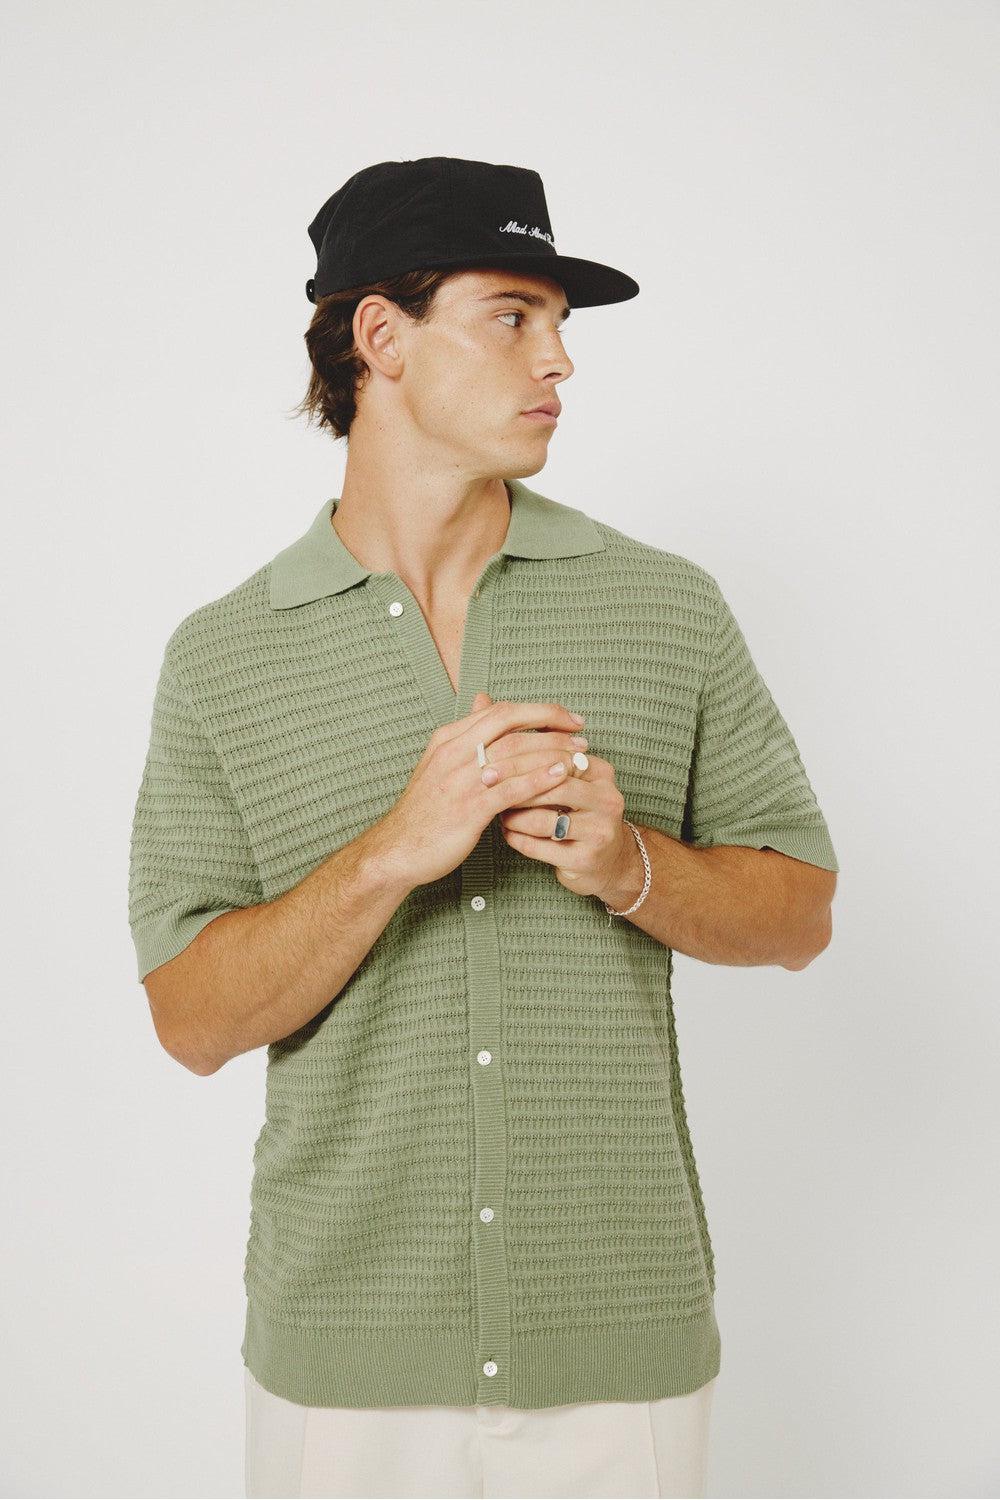 VERONA KNIT S/S SHIRT OLIVE | Kore Studios | Mad About The Boy